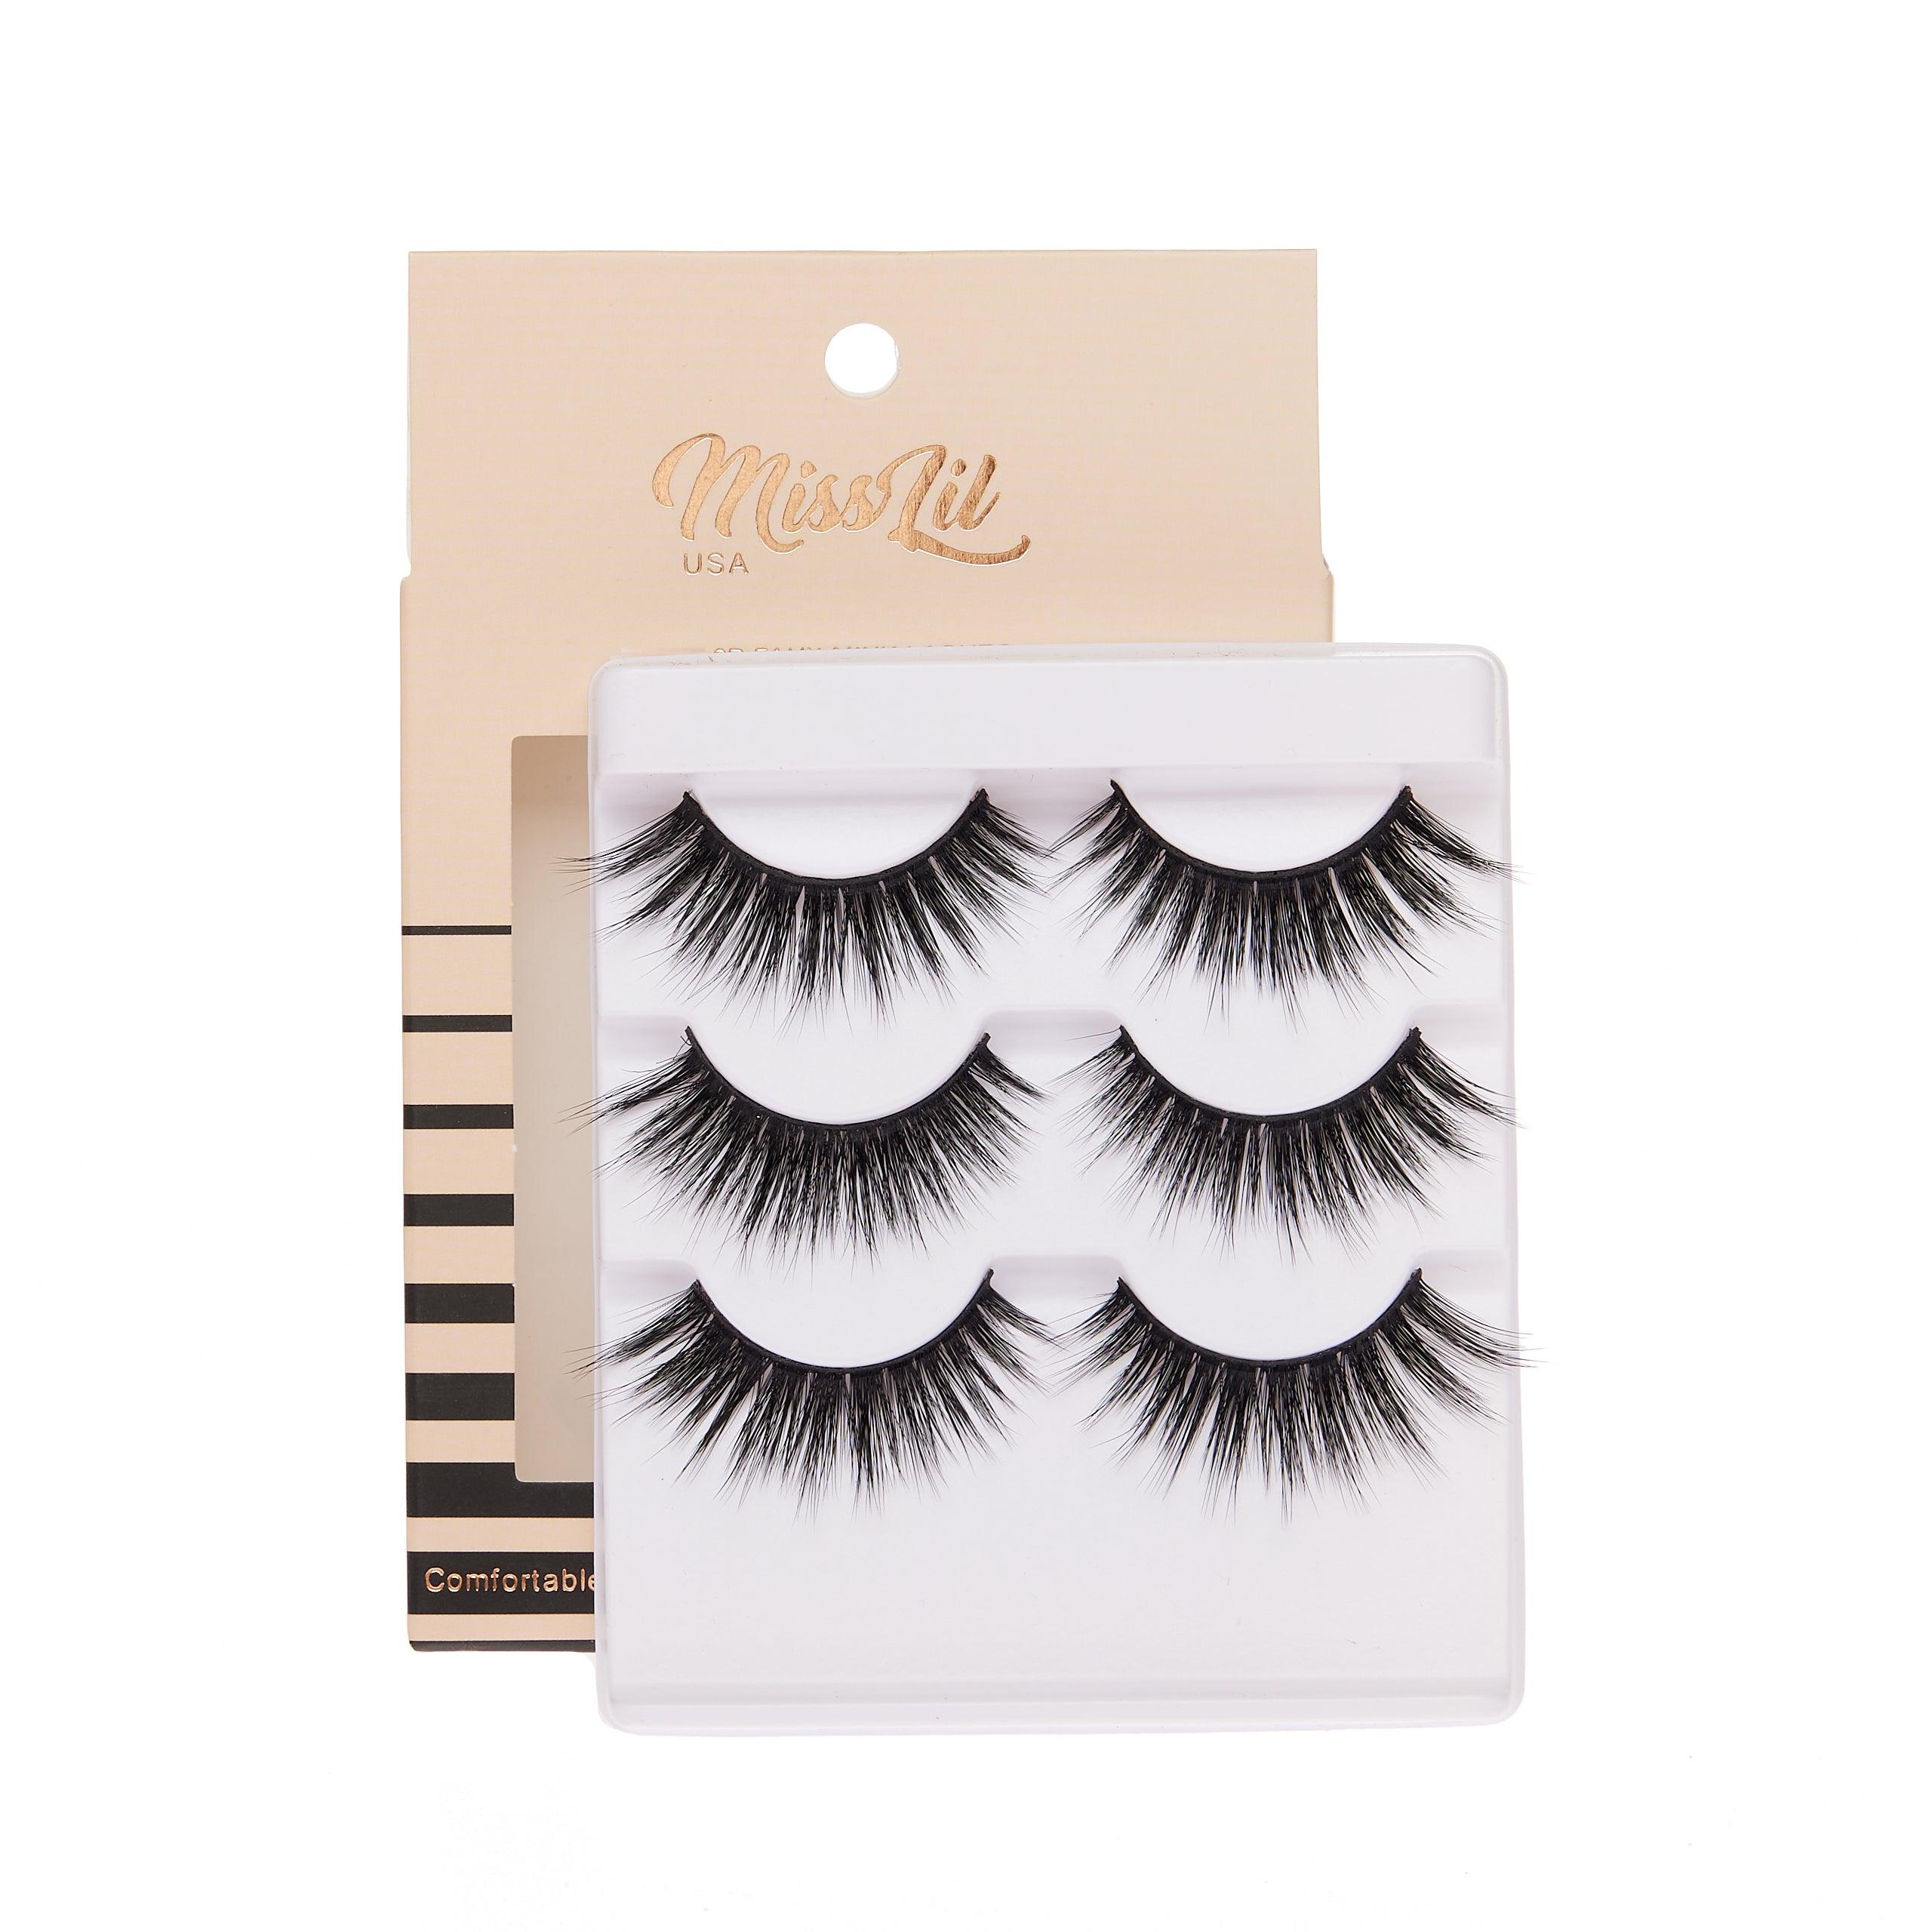 3-Pair Faux 9D Mink Eyelashes - Luxury Collection #8 - Pack of 3 - Miss Lil USA